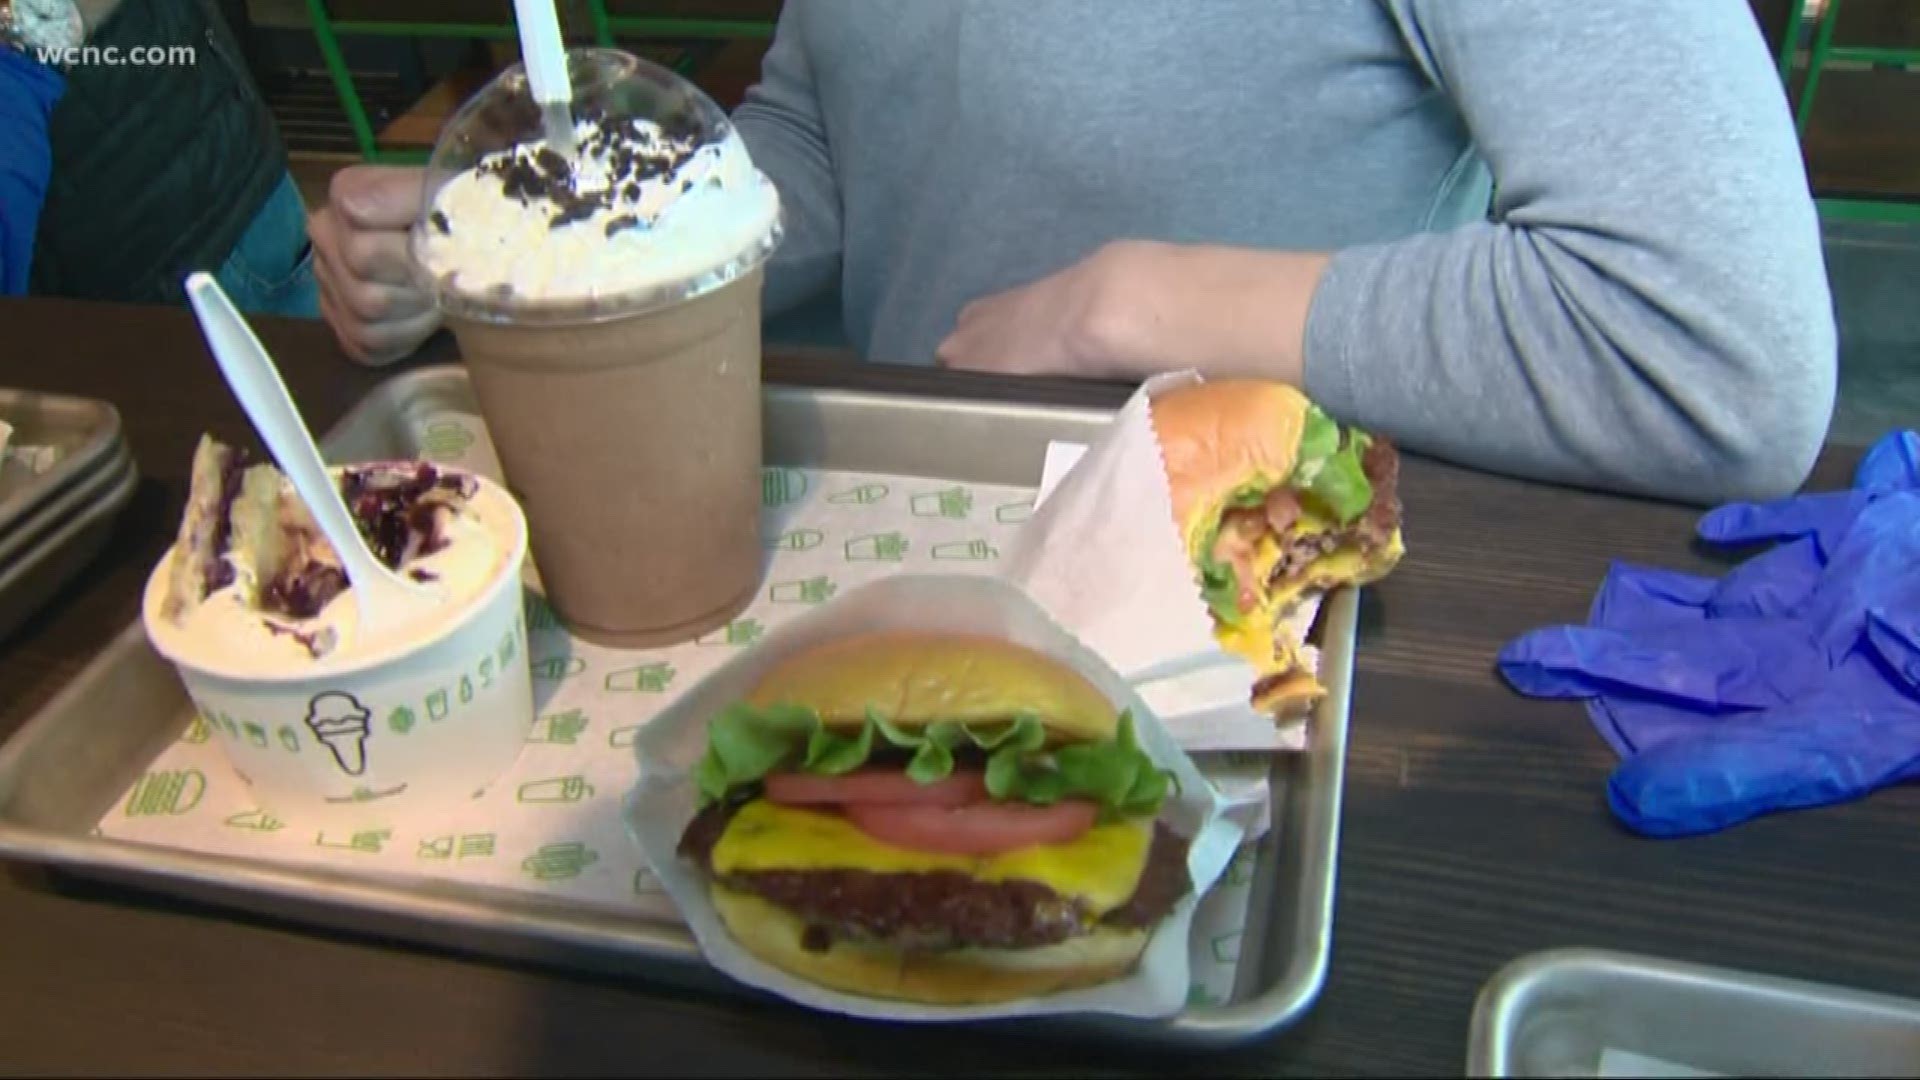 Shake Shack, one of New York's most iconic burger spots, is making its Queen City debut with the grand opening in Charlotte Thursday.